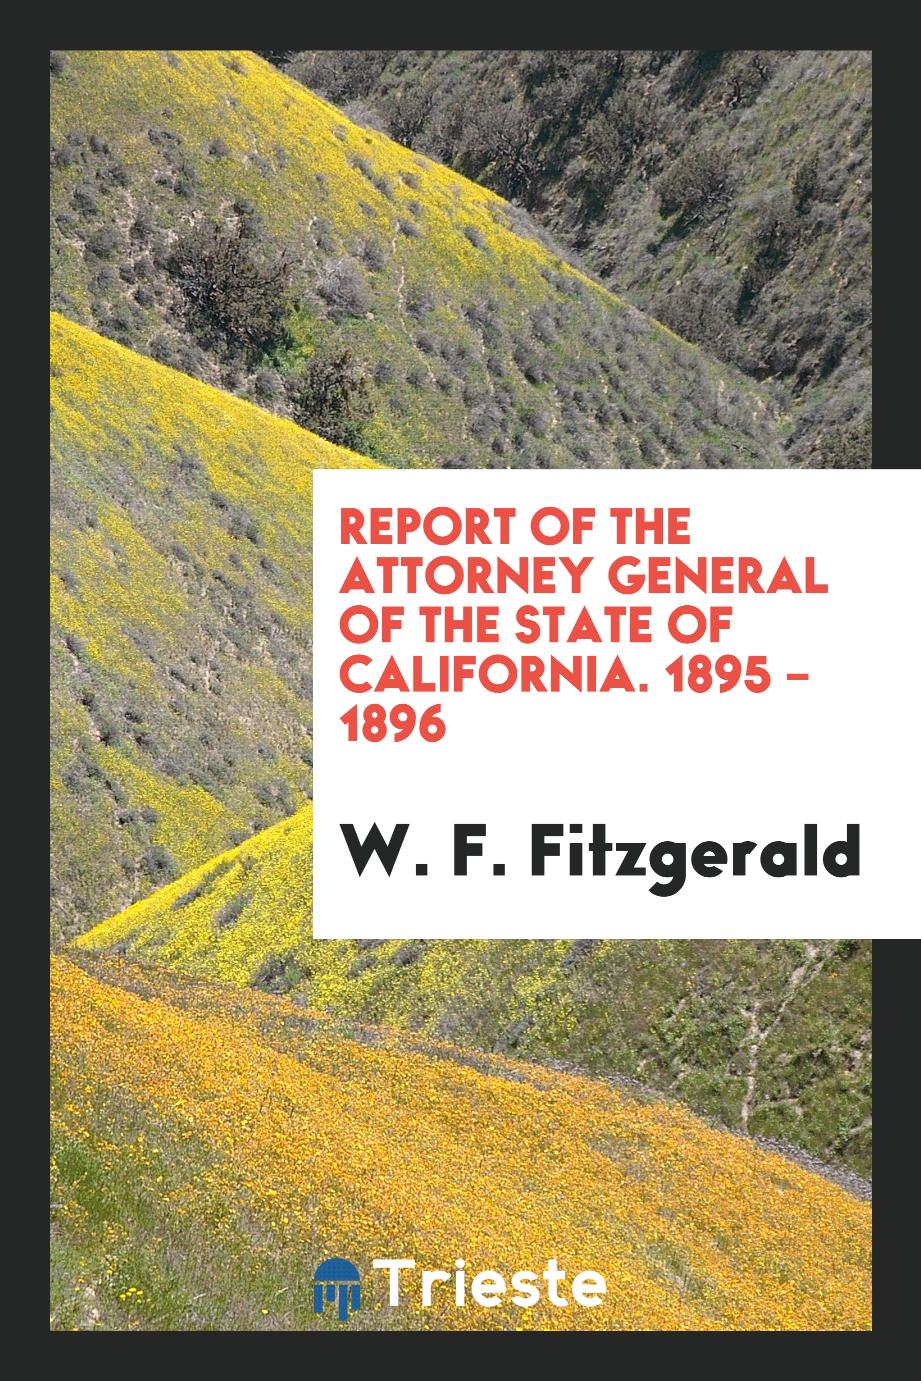 Report of the Attorney General of the State of California. 1895 – 1896